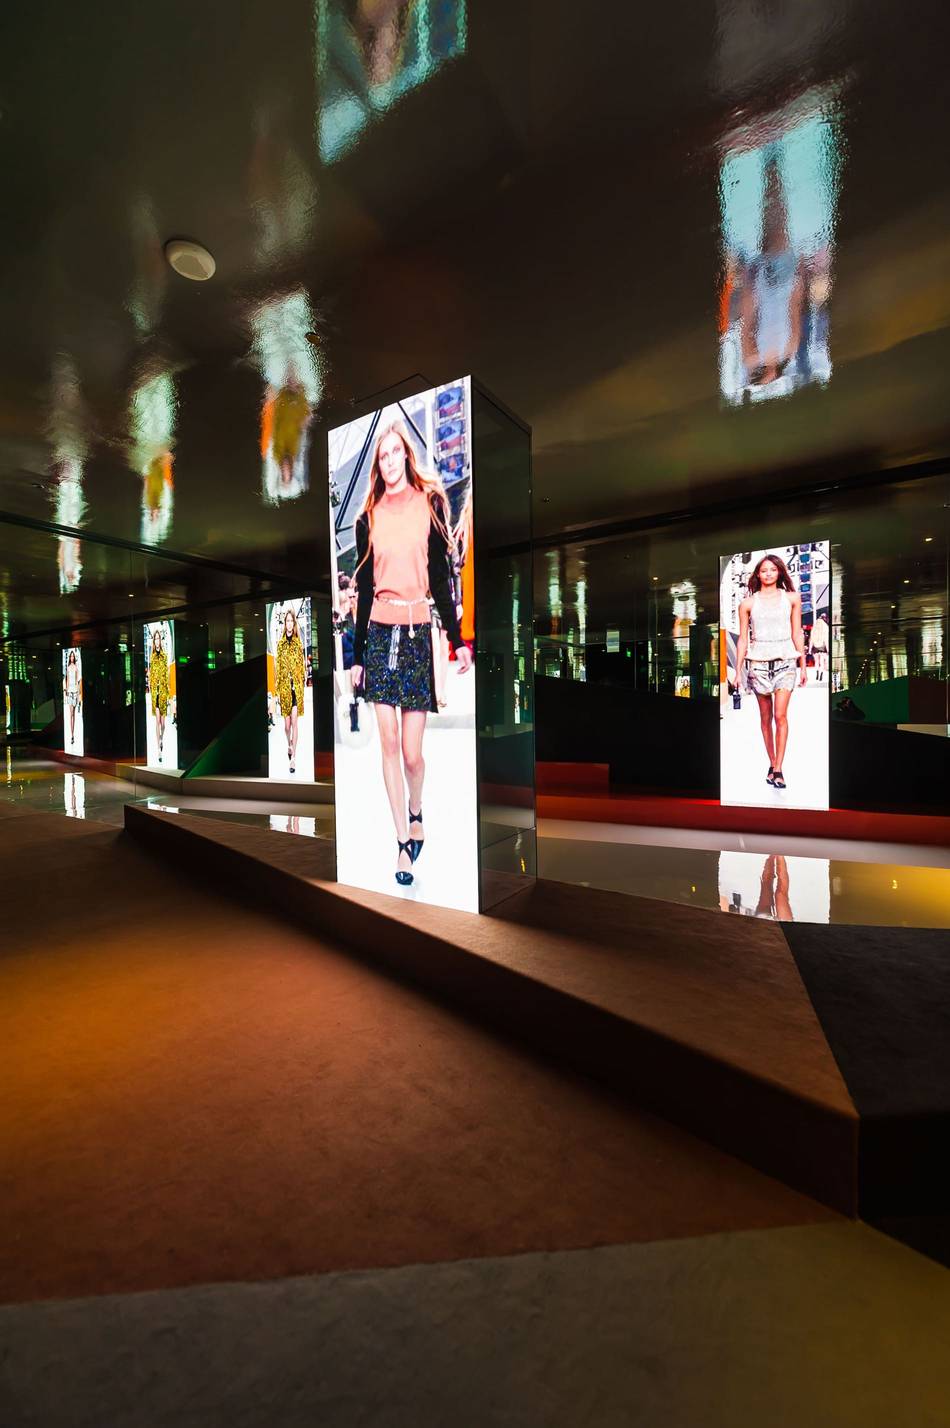 After Series 1 and Series 2, Louis Vuitton will soon open the doors to the exhibition at its first destination in Asia